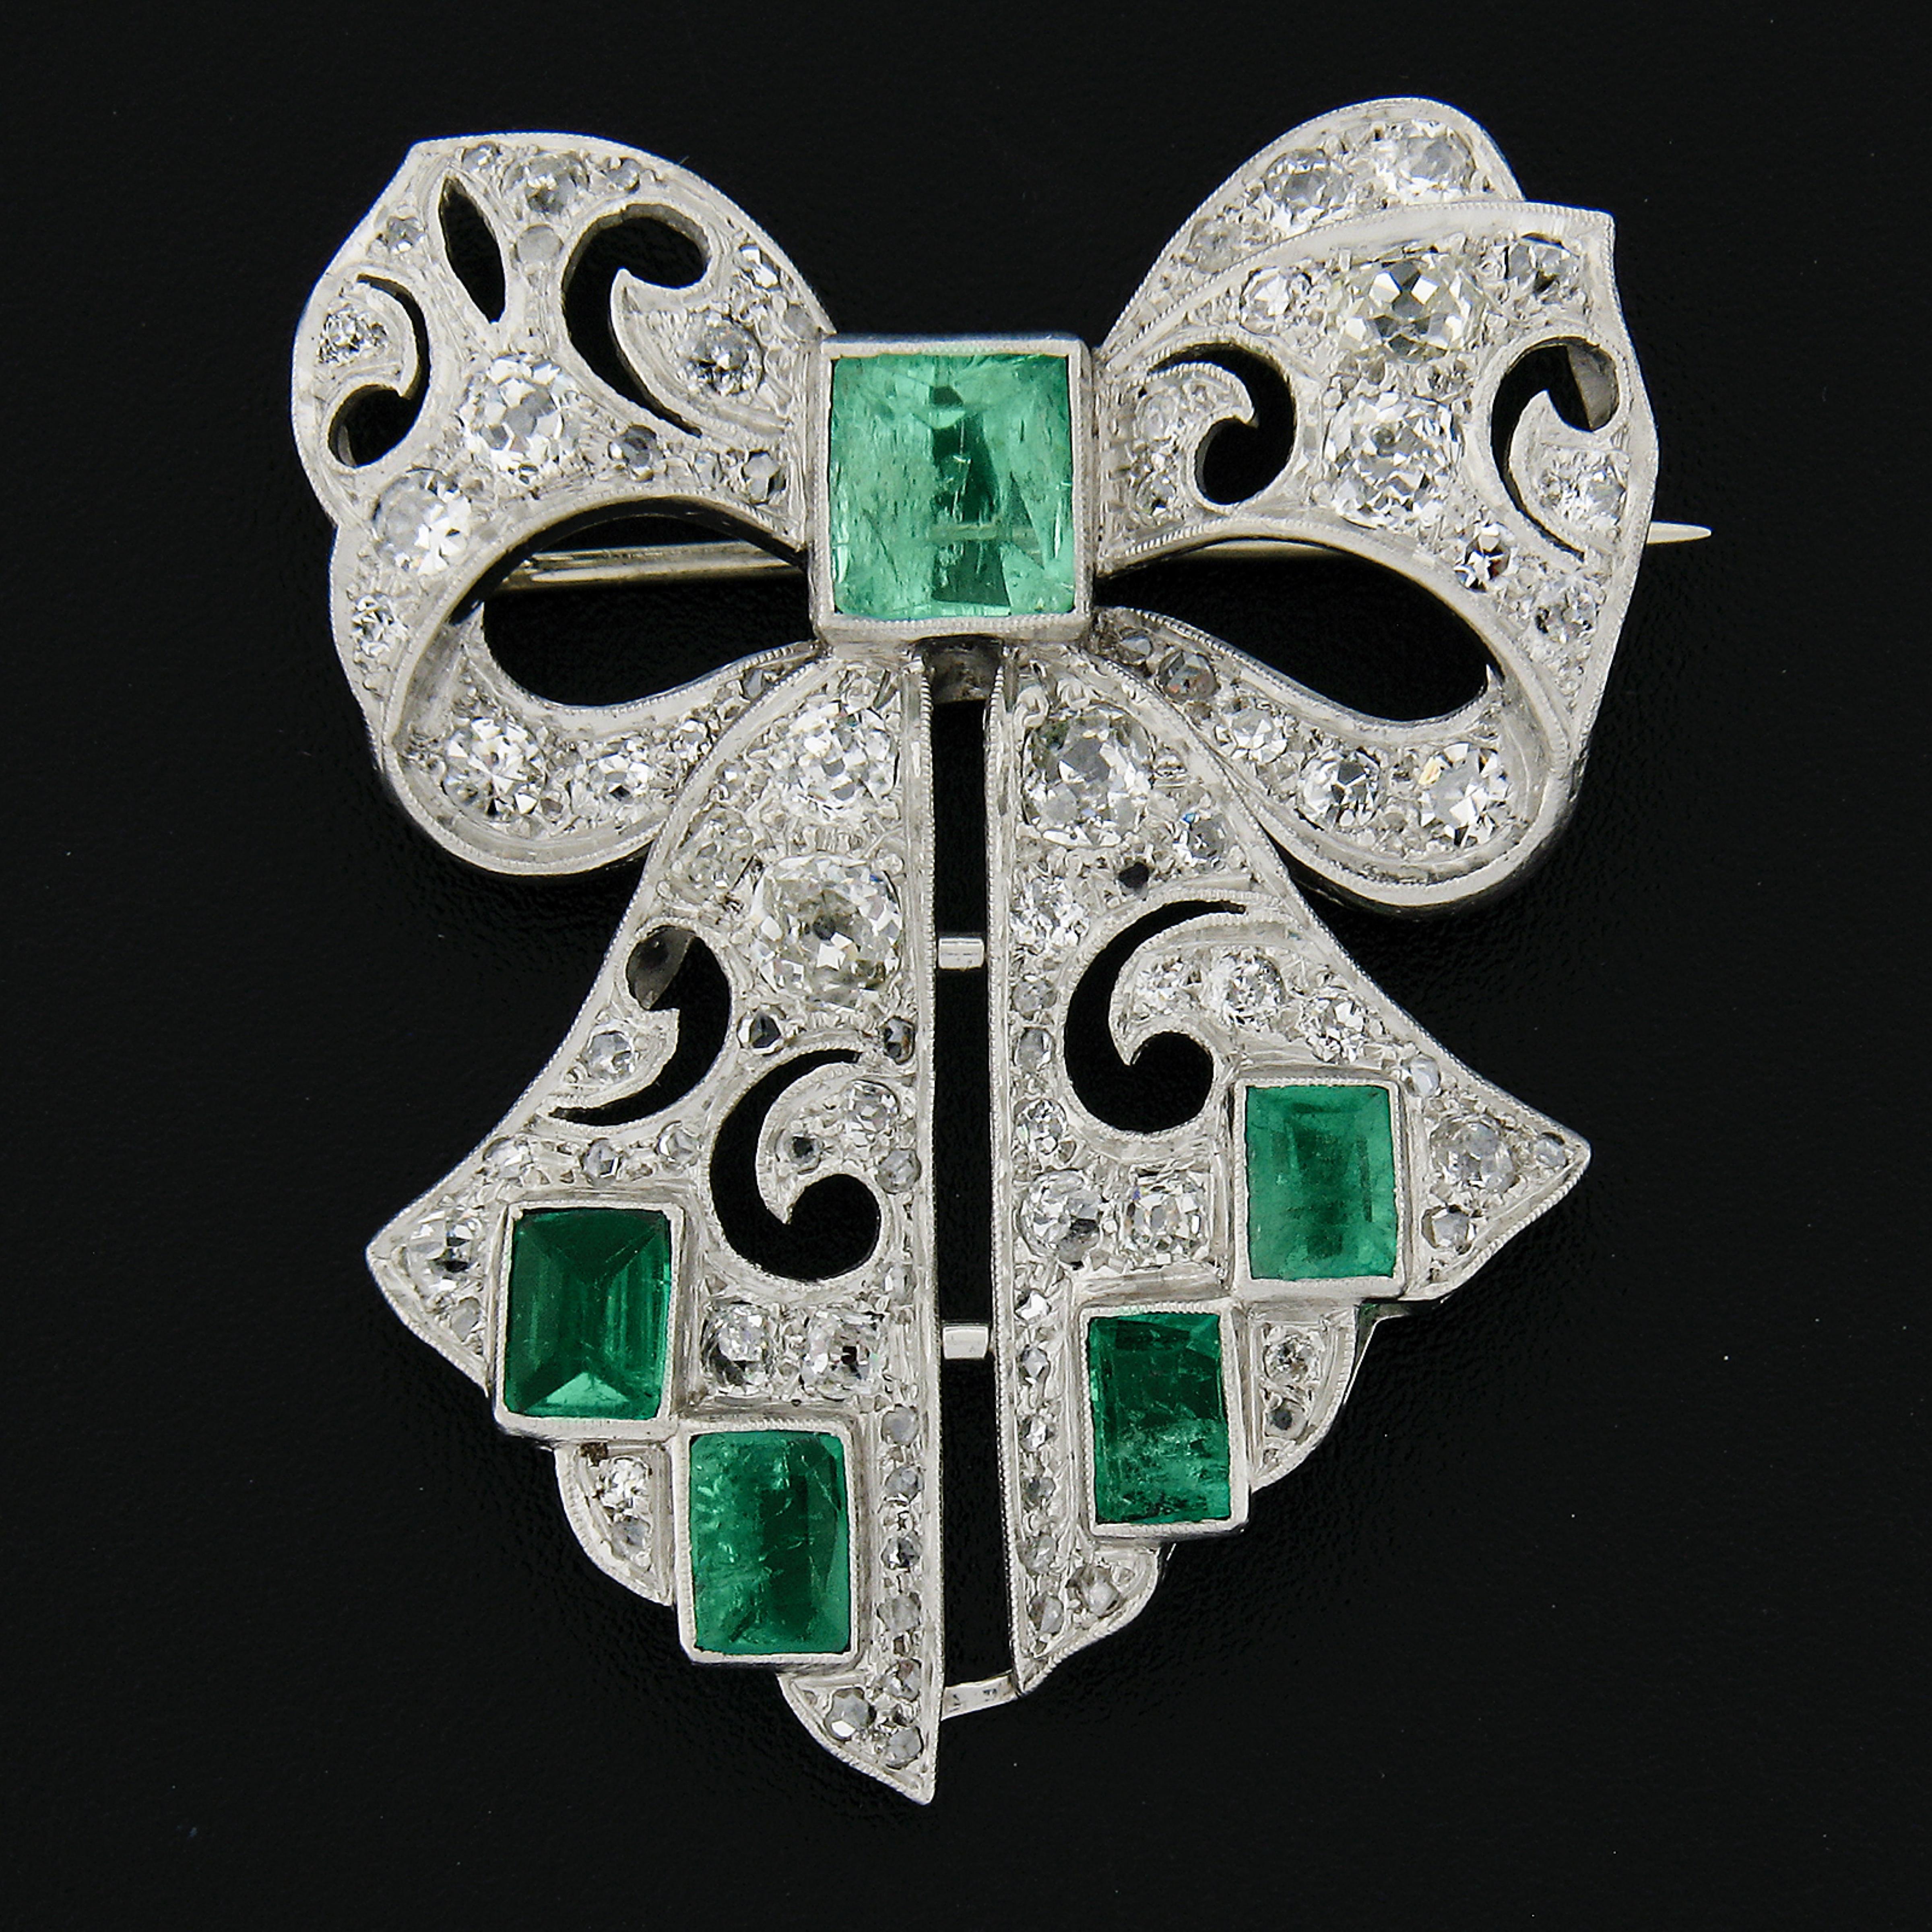 This magnificent antique bow pin brooch was crafted in solid platinum during the art deco period. It is adorned with with large and fine quality natural green emerald stones and drenched entirely with old cut diamonds. These emeralds add such a rich